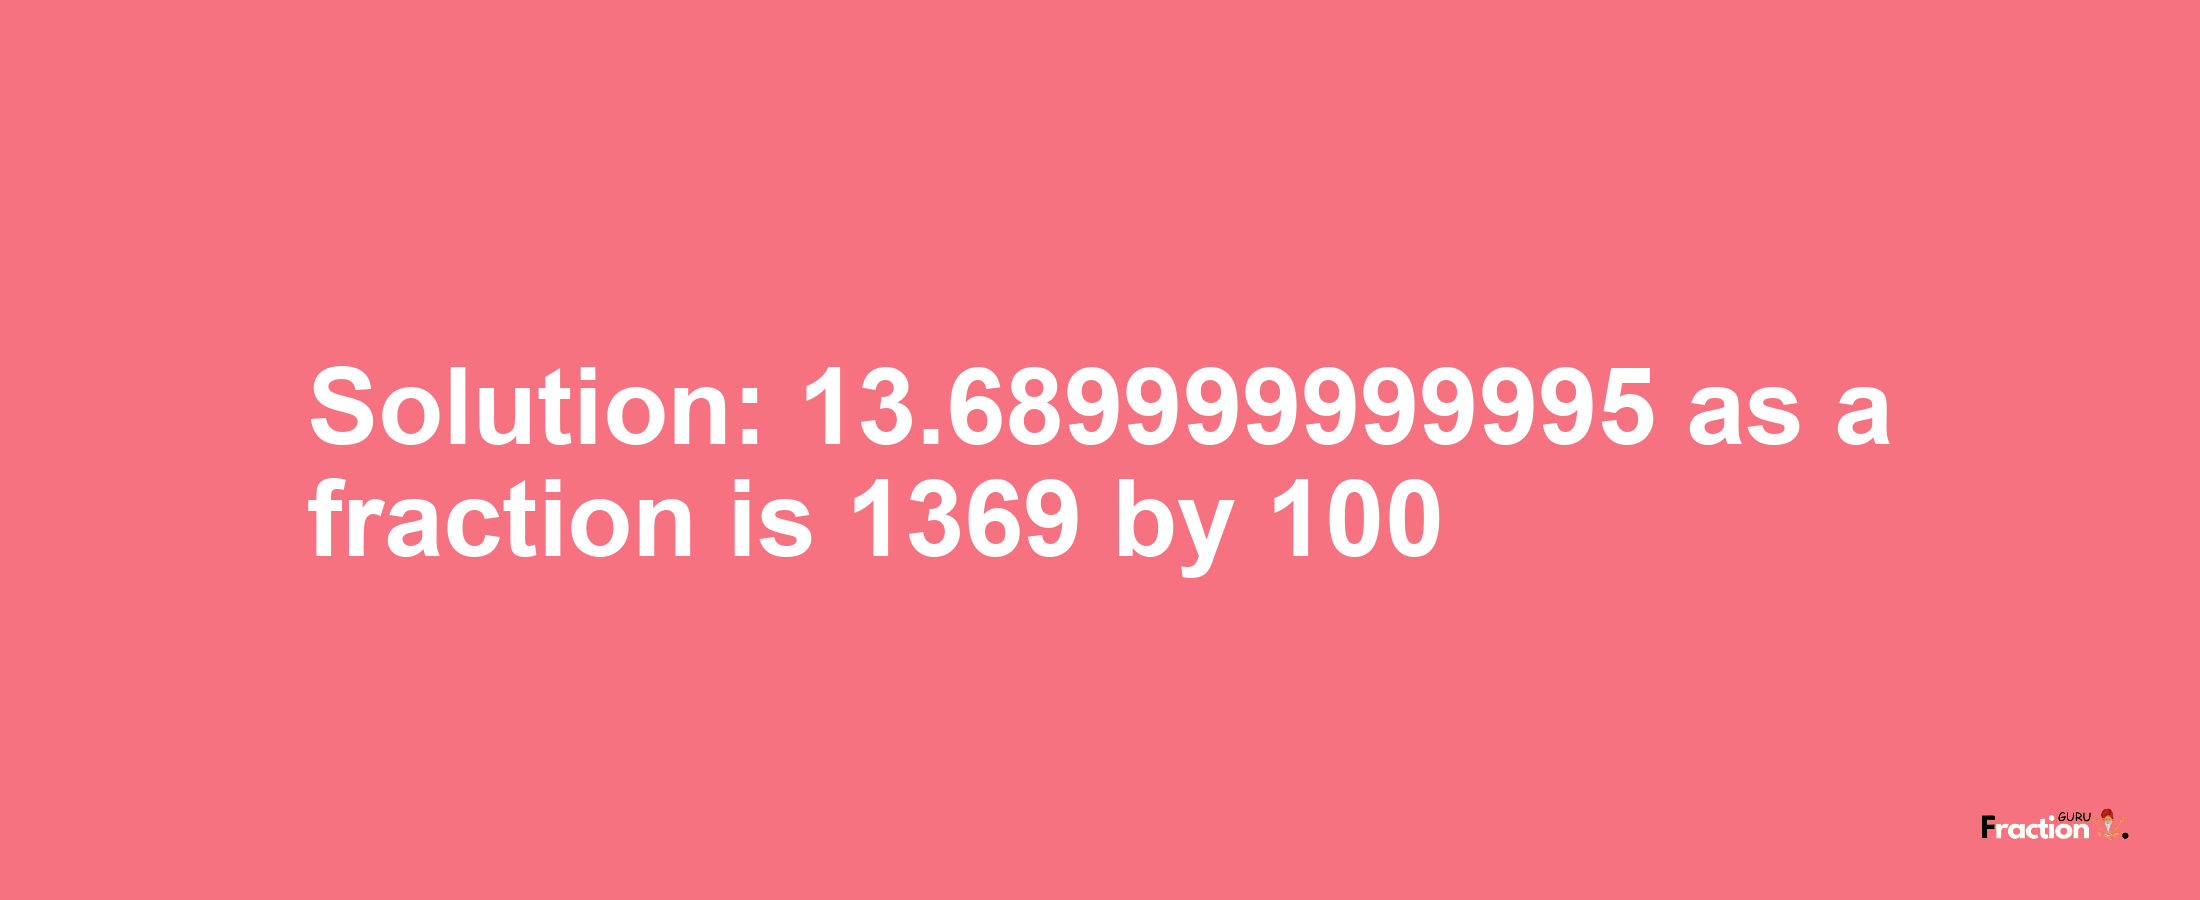 Solution:13.689999999995 as a fraction is 1369/100